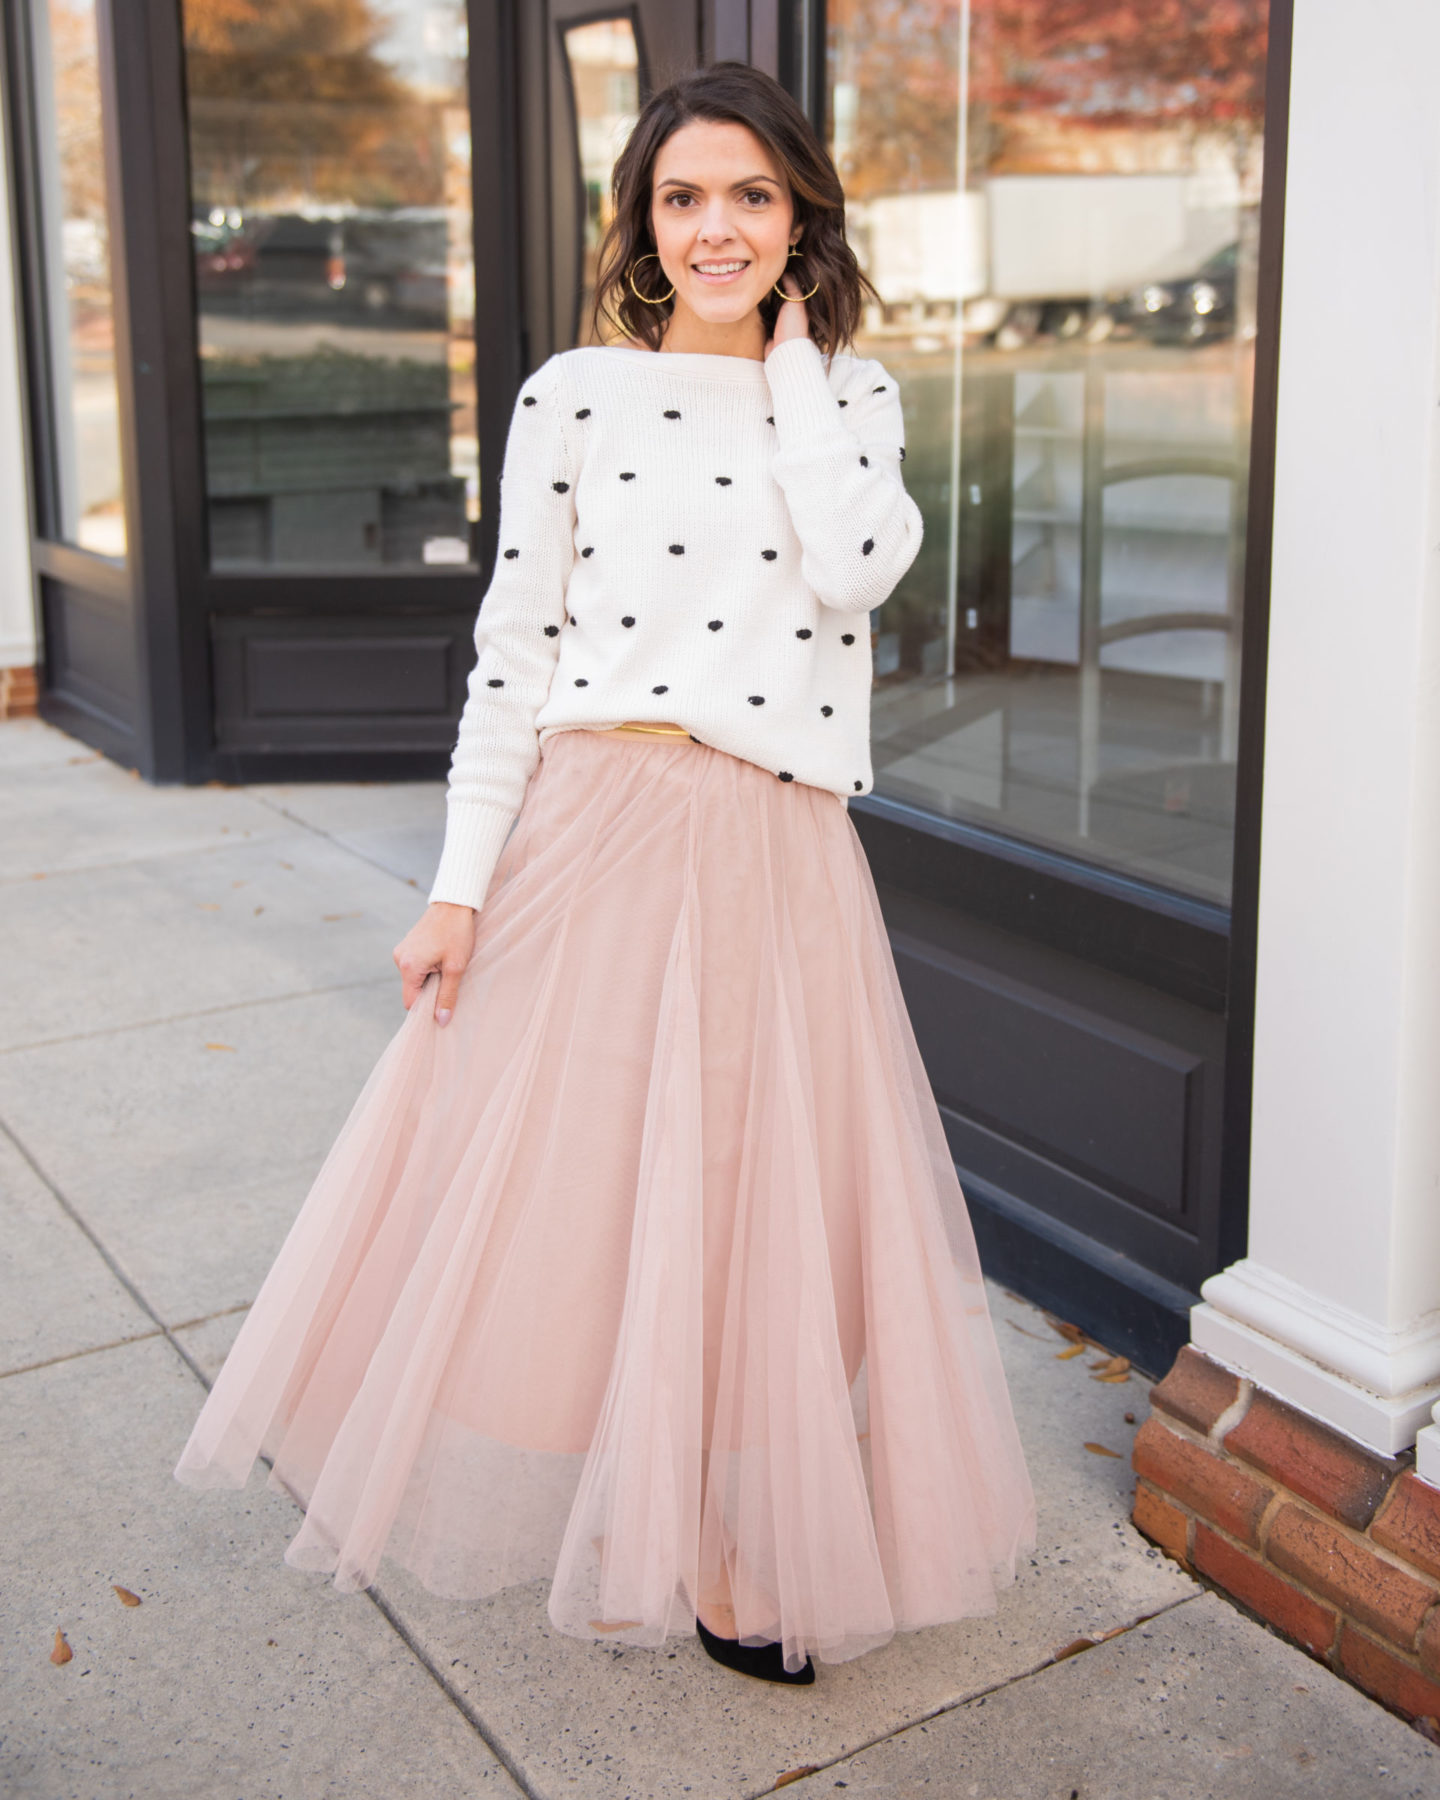 3 Ways To Style A Tulle Skirt The Sarah Stories 7824